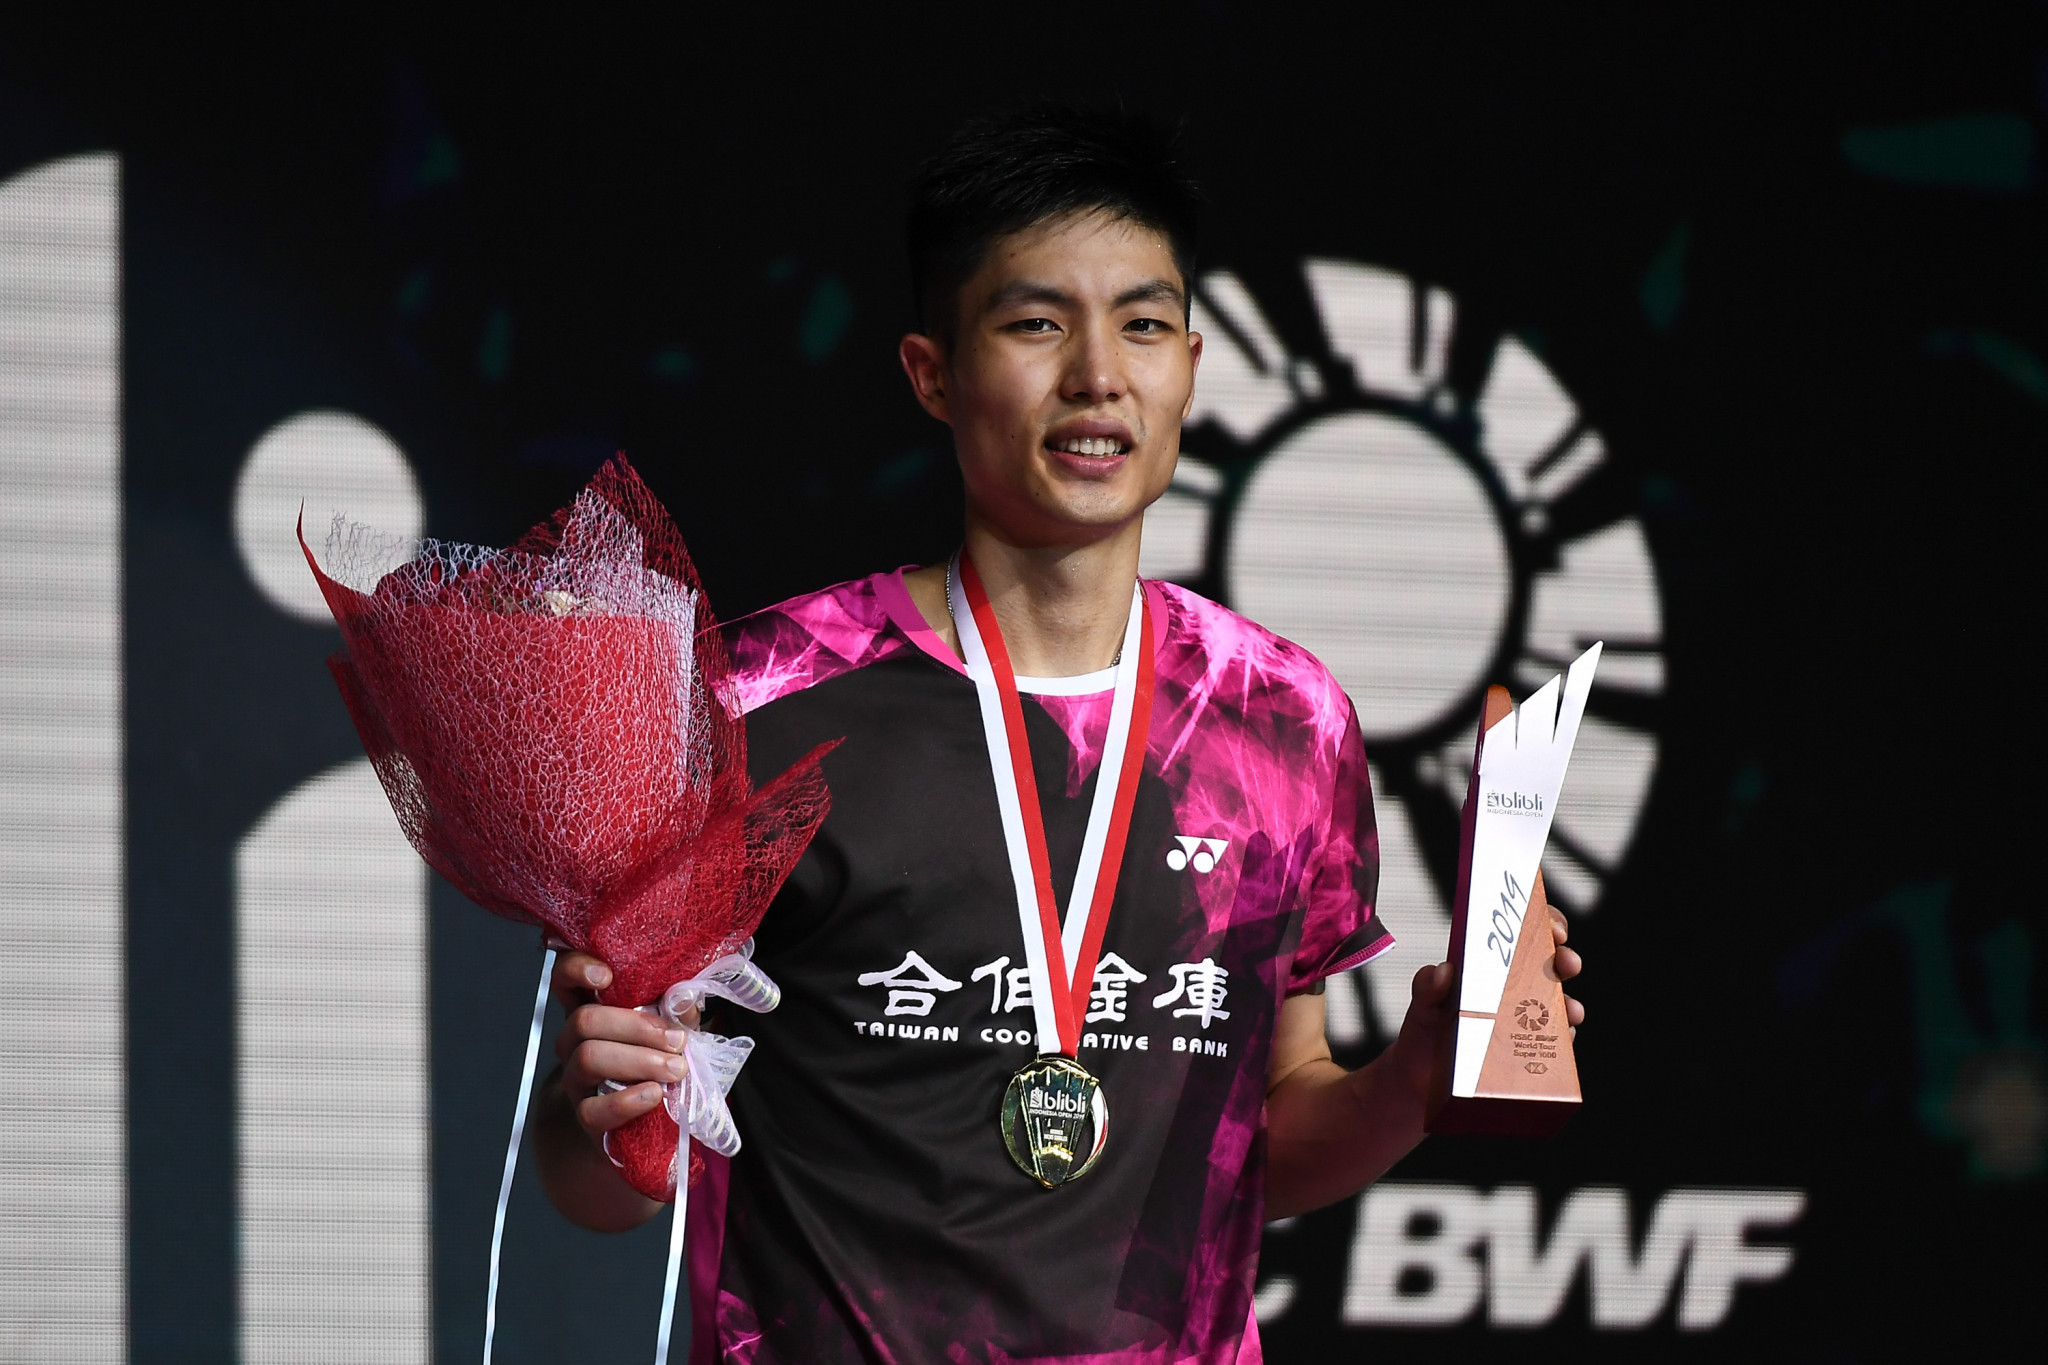 Chou and Yamaguchi seal titles at BWF Indonesia Open